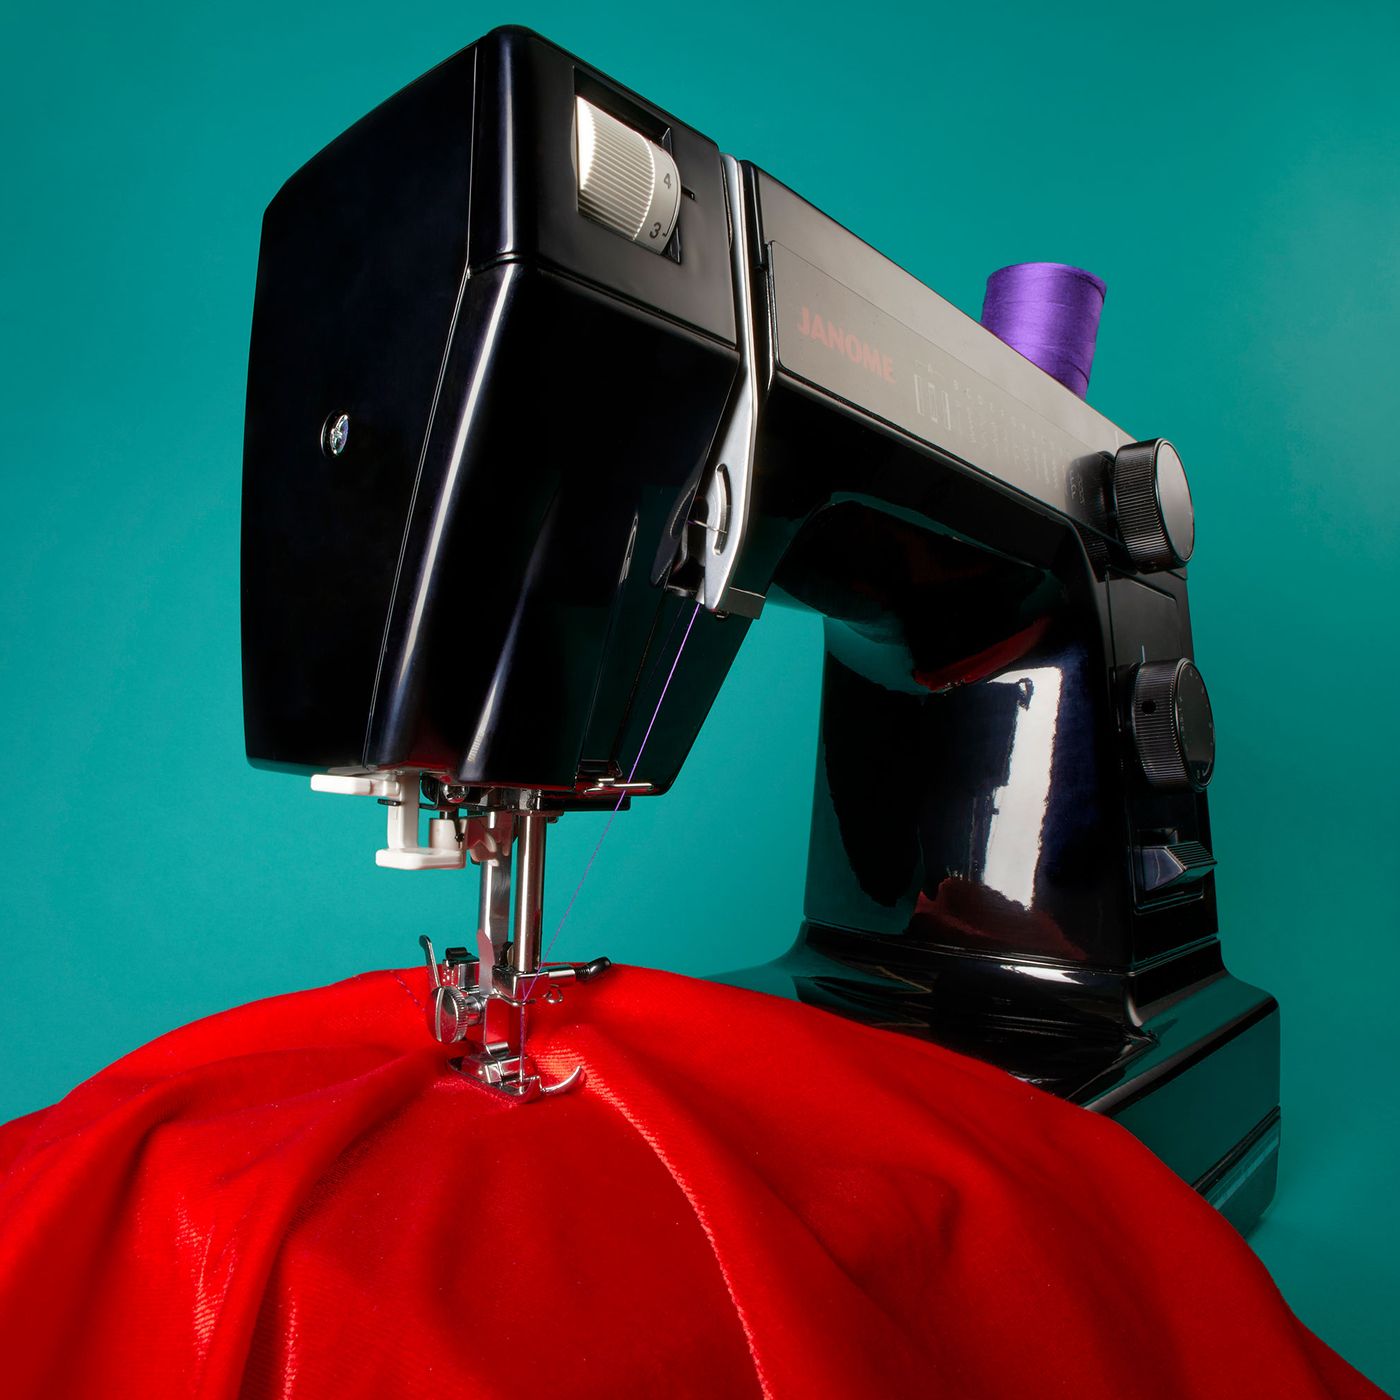 Best Sewing Machine for Upholstery, Just Fabrics